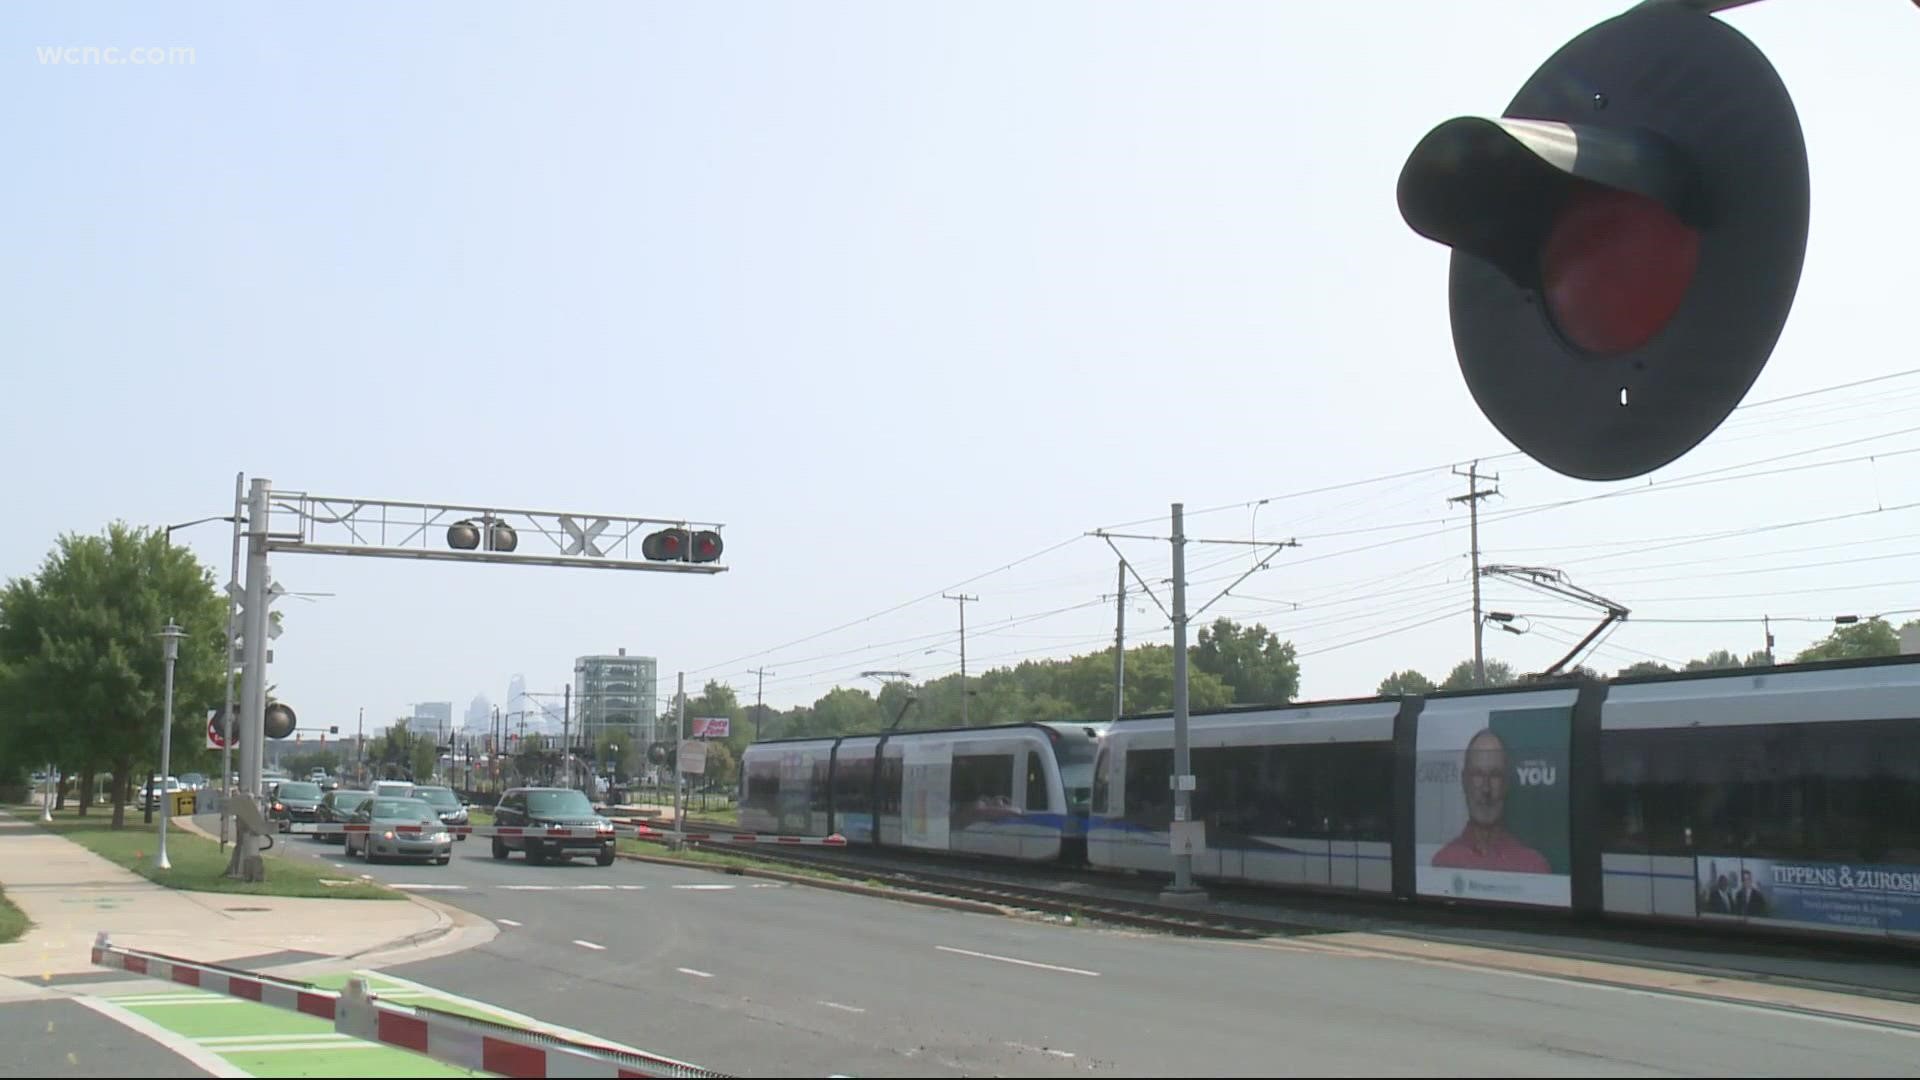 The new light rail station comes amid raid growth in the South End over the past few years.